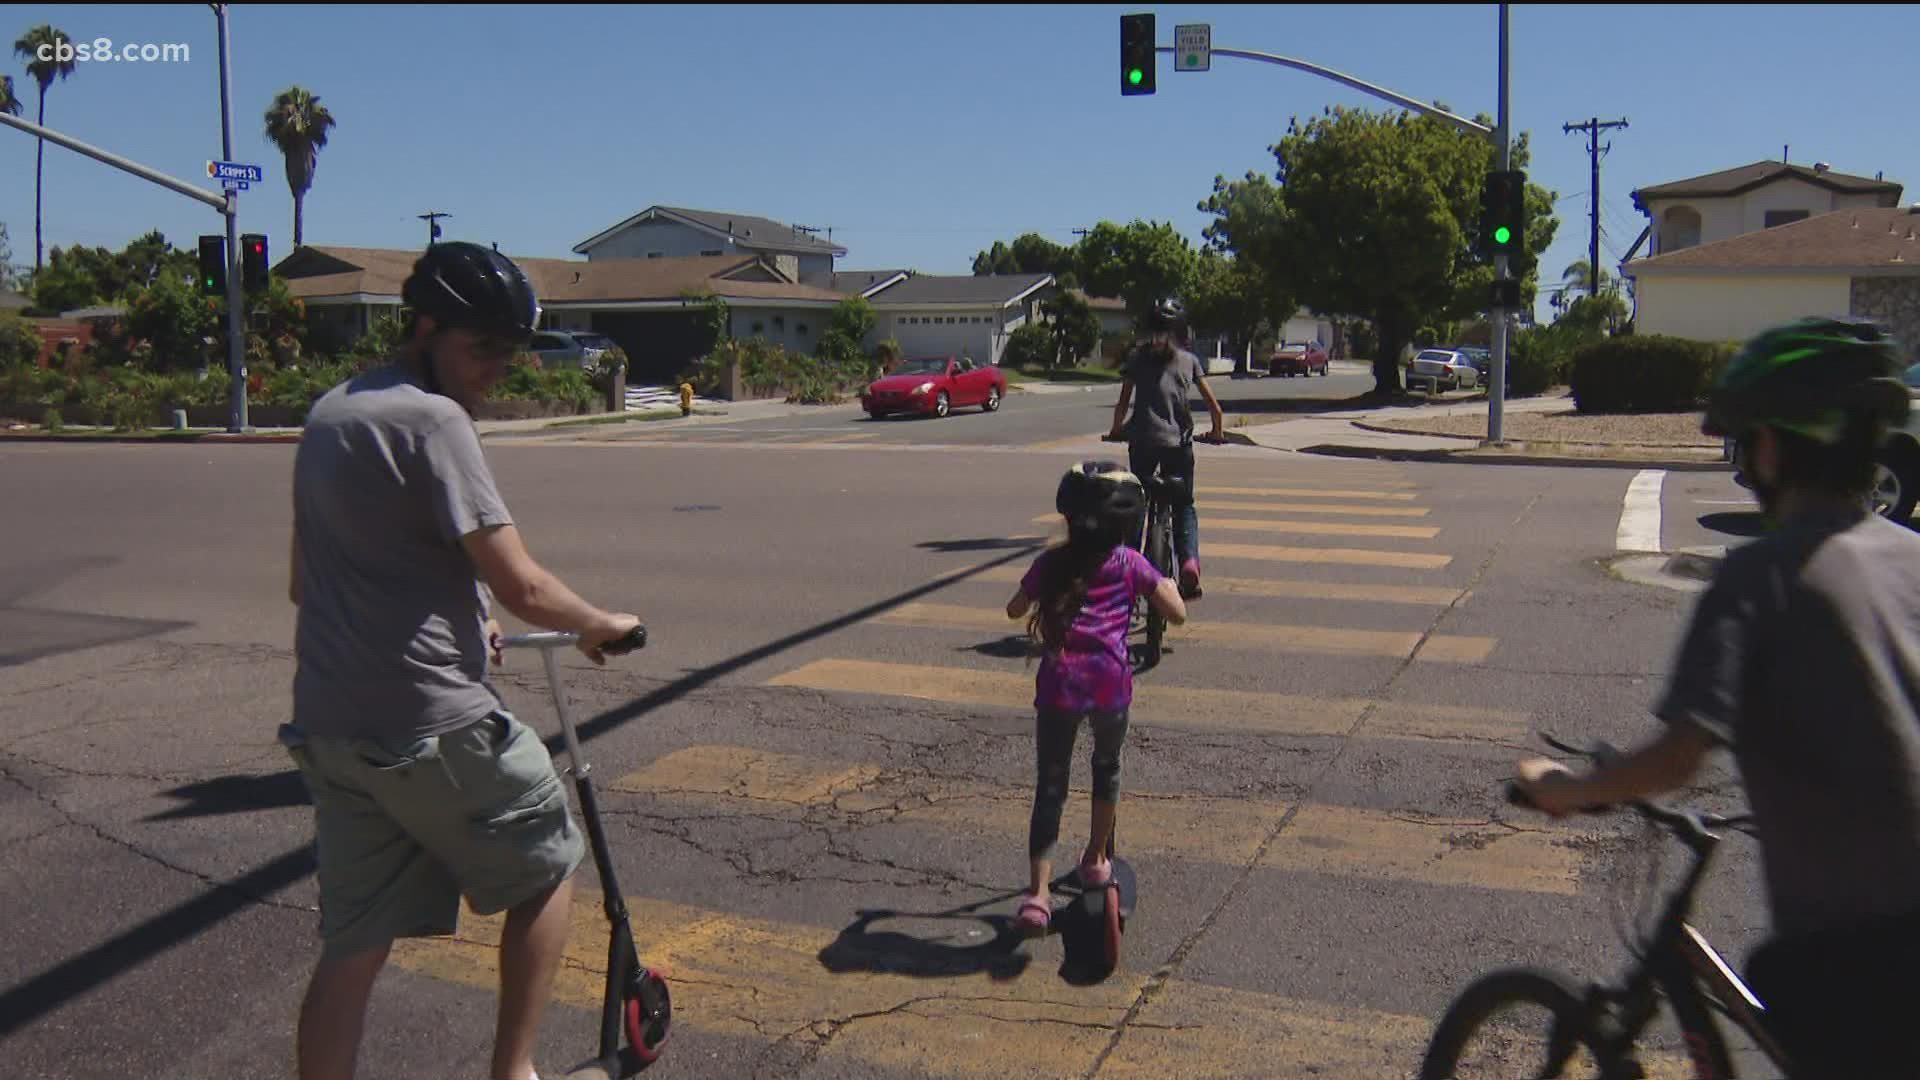 The traffic calming plan was moving forward quickly, but a quick, huge outcry from residents has convinced the district's city council member to tap the brakes.